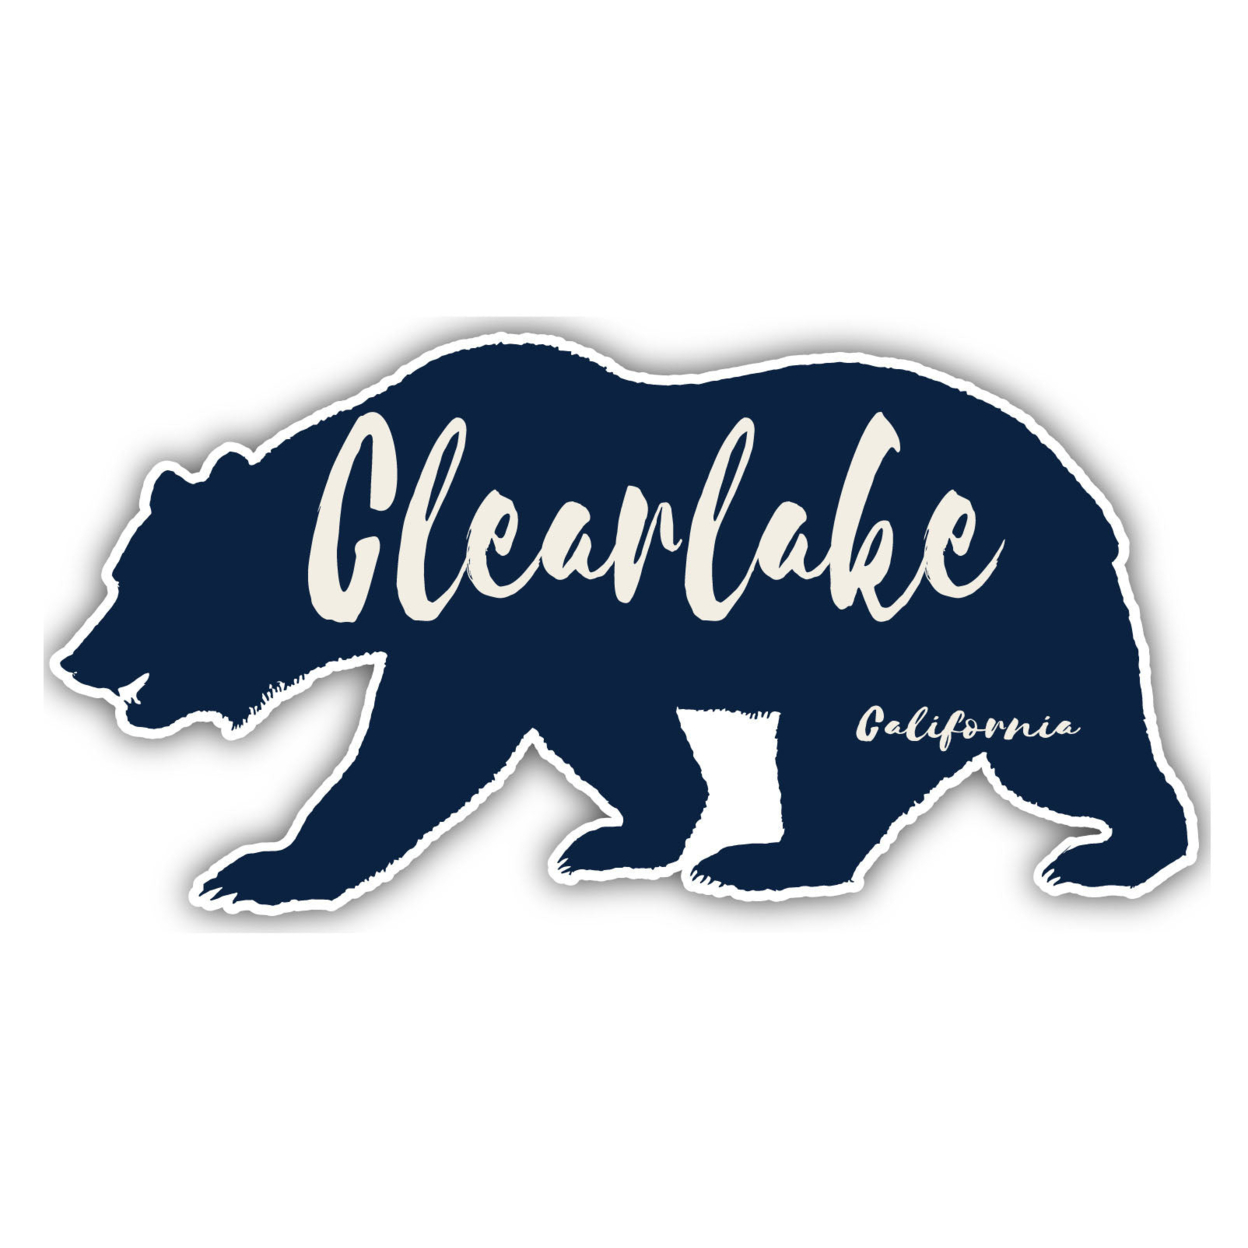 Clearlake California Souvenir Decorative Stickers (Choose Theme And Size) - 4-Pack, 8-Inch, Bear